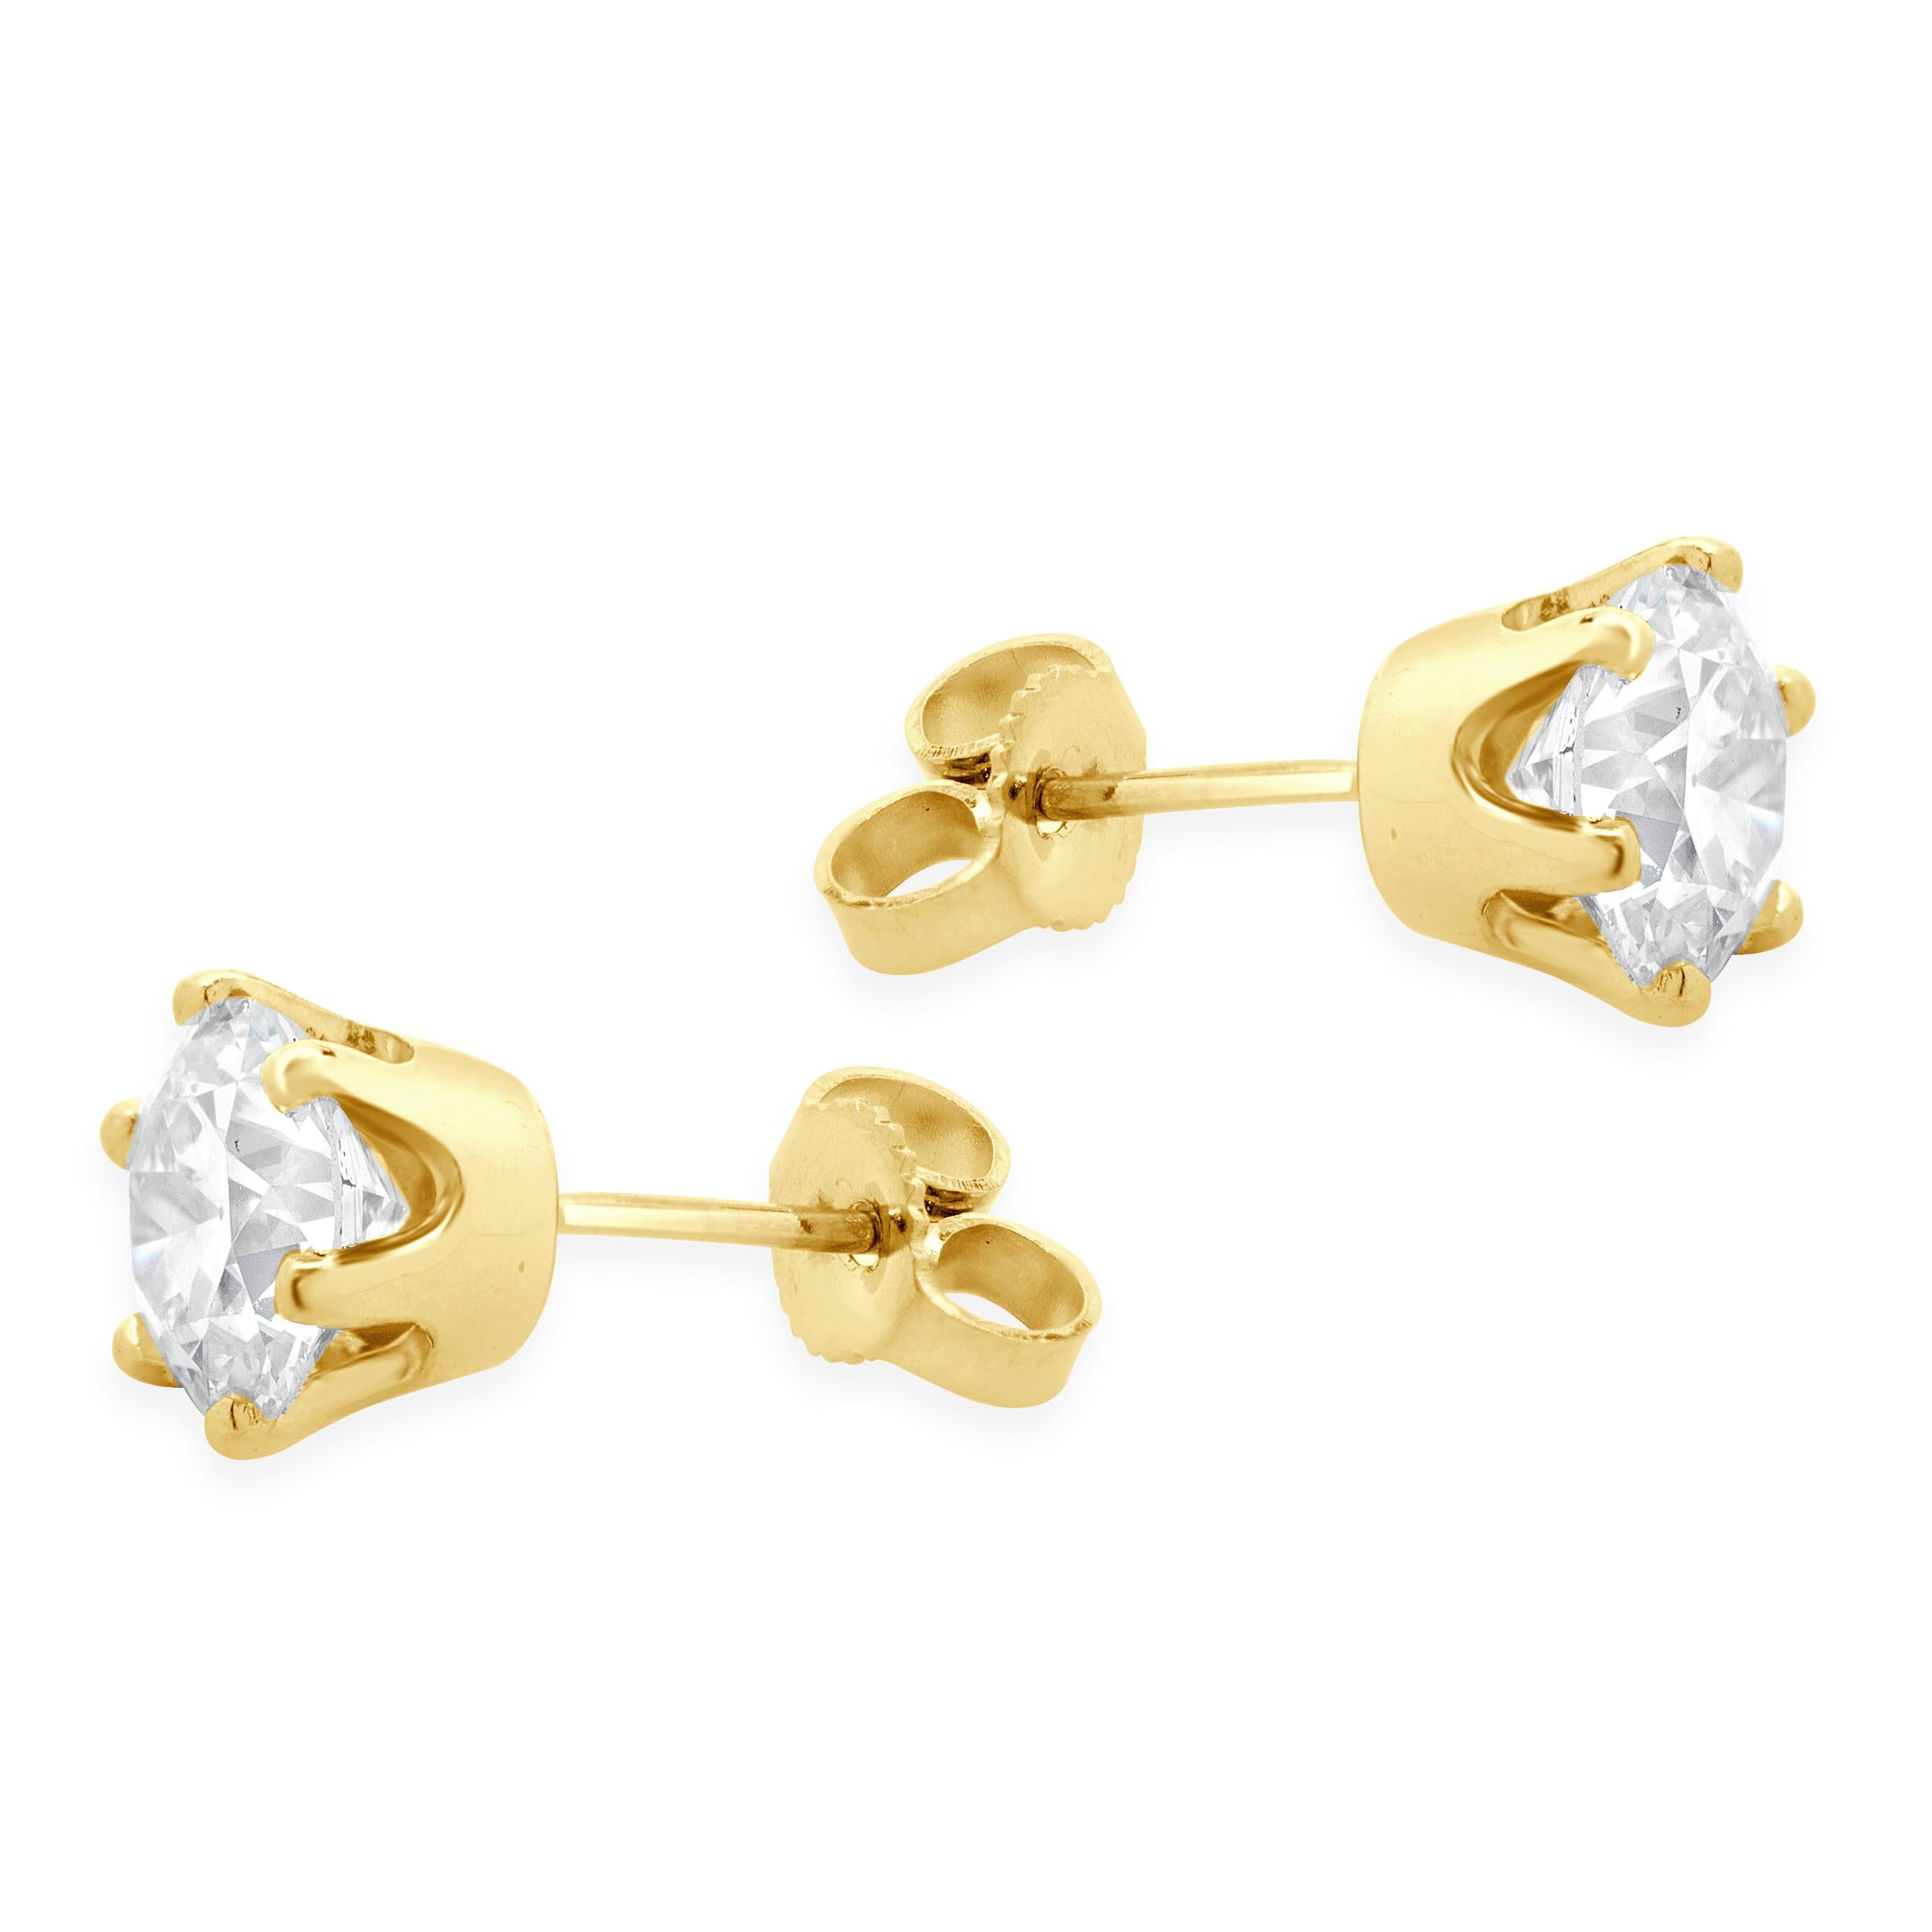 Material: 14K yellow gold
Diamonds: 2 round European cut = 2.00cttw
Color: G 
Clarity: VS2-SI1
Dimensions: earrings measure approximately 7.60mm in diameter
Fastenings: friction backs
Weight: 1.78 grams
